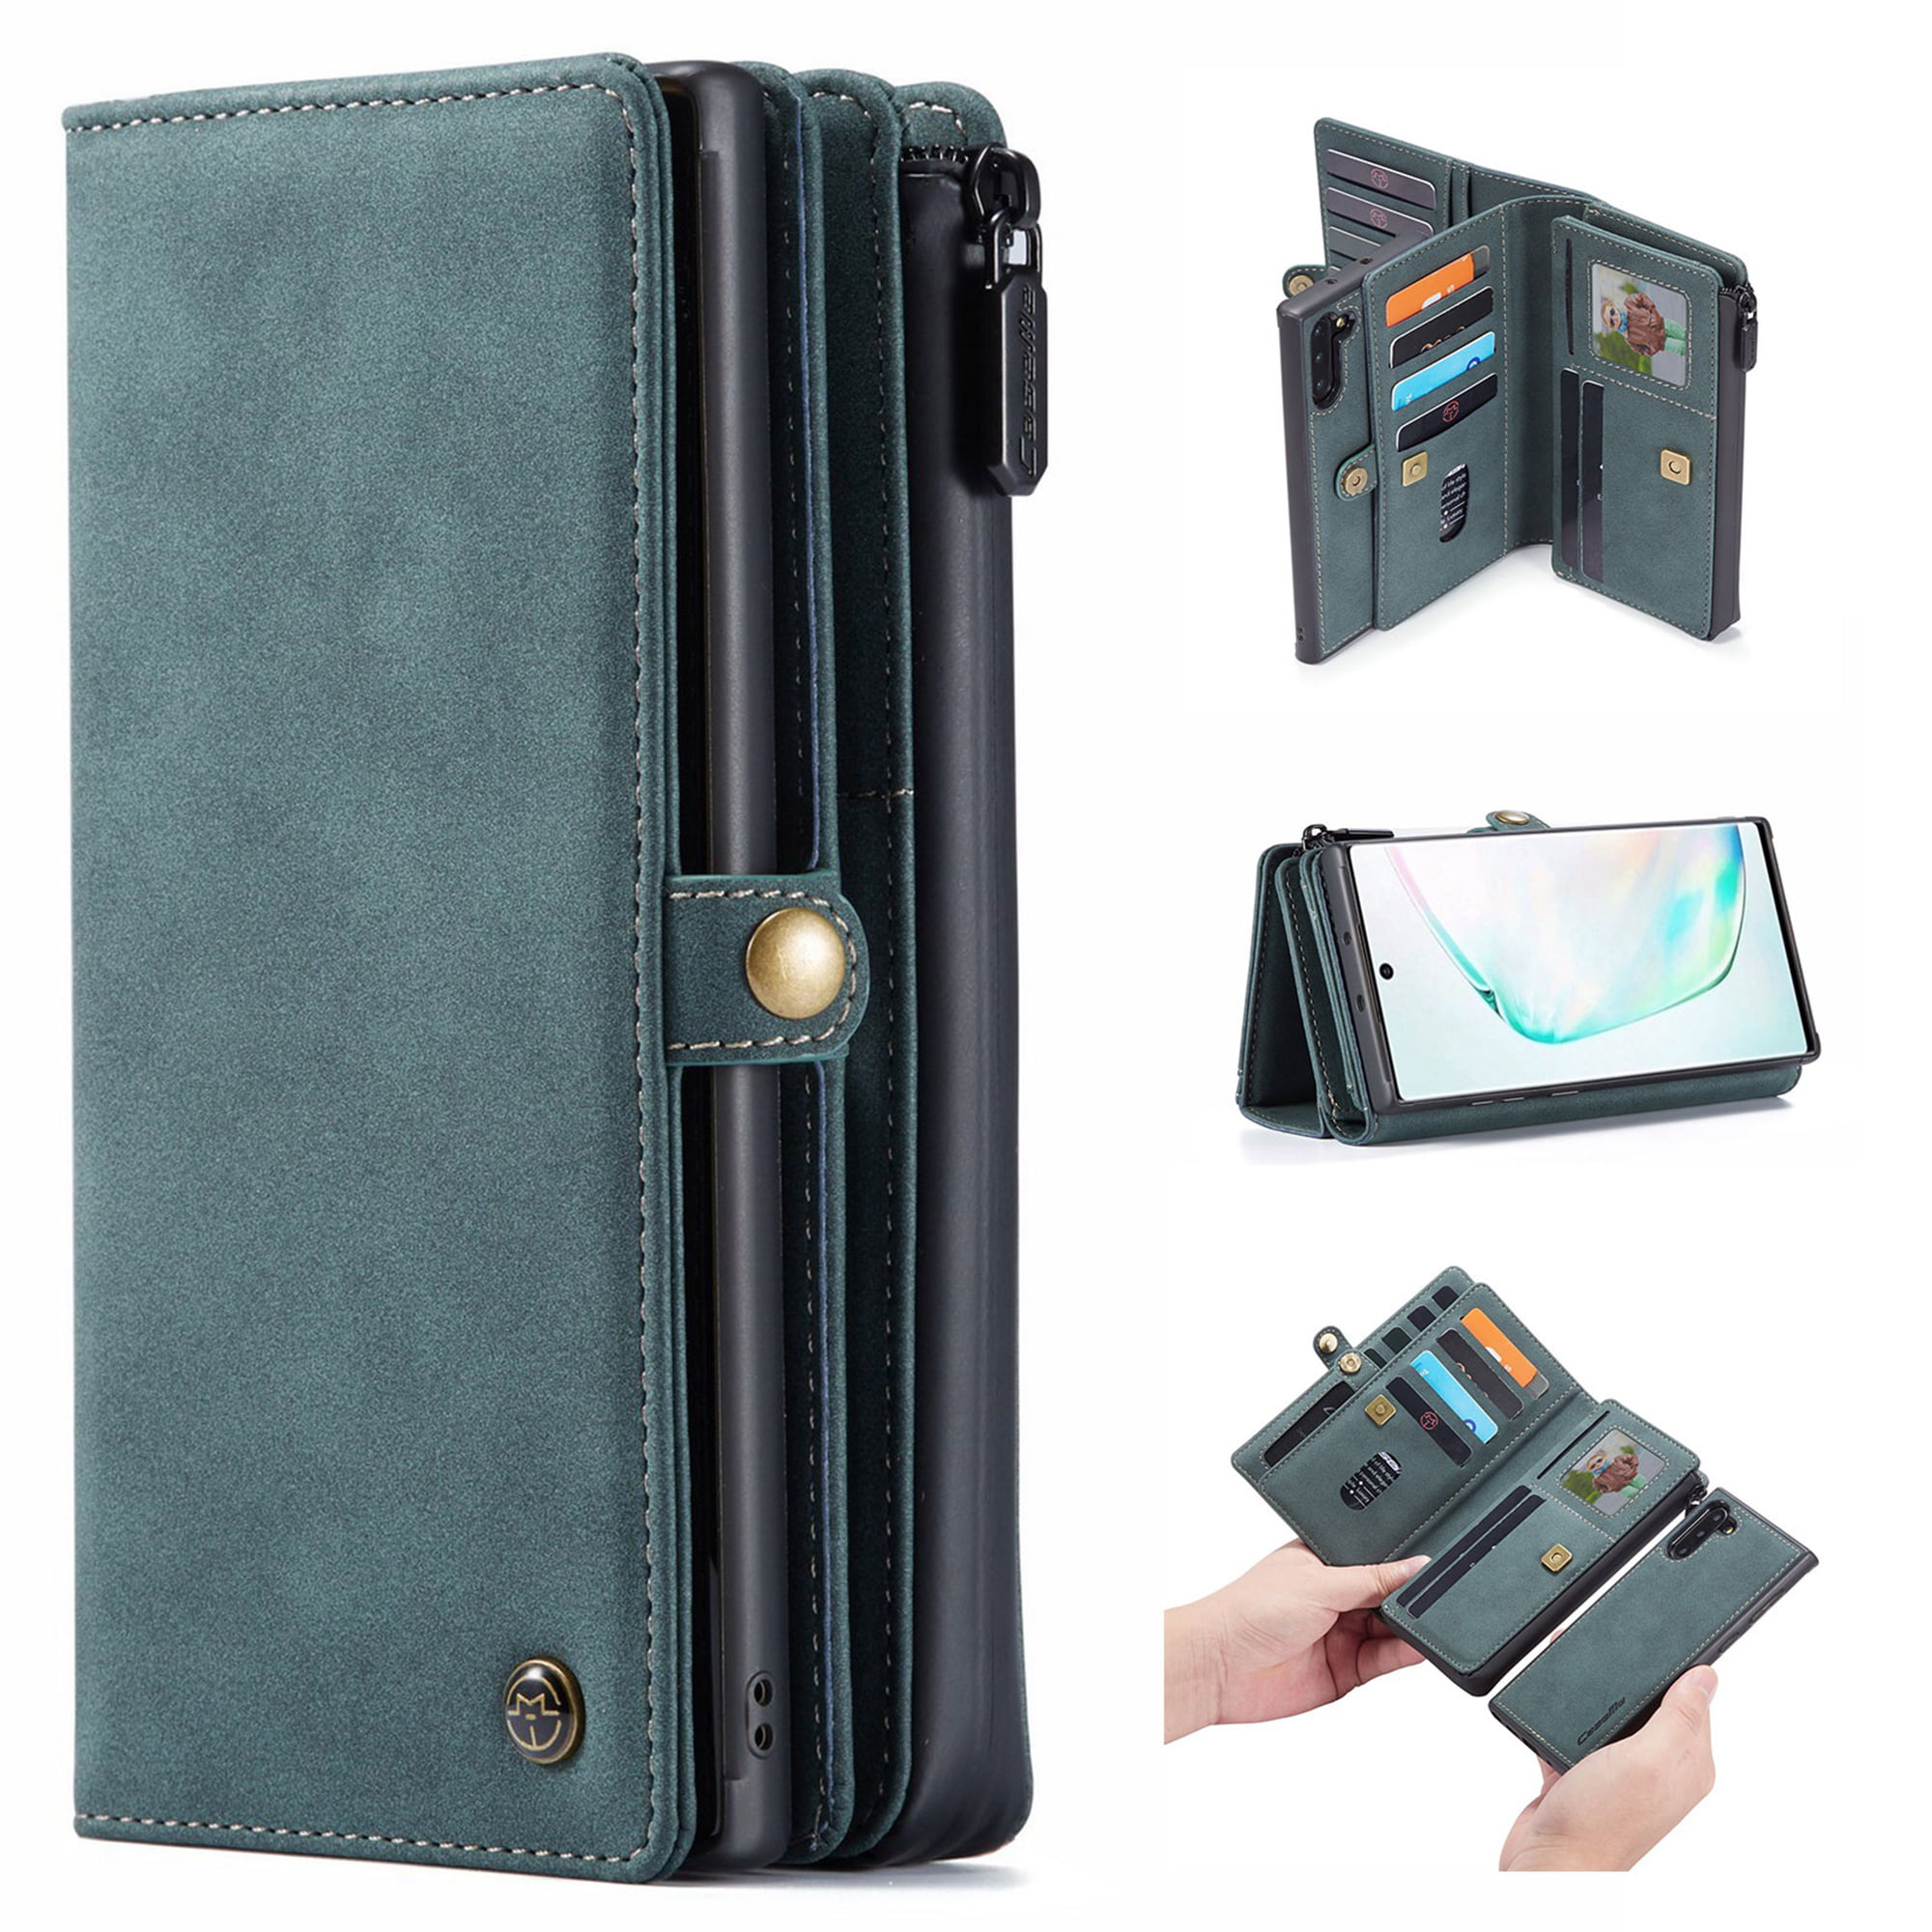 Samsung Galaxy Note 10 Plus Case Shockproof Business PU Leather Flip Wallet Phone Cases Folio Slim Fit Magnetic Protective Cover TPU Bumper with Stand Card Holder Slots Blue 